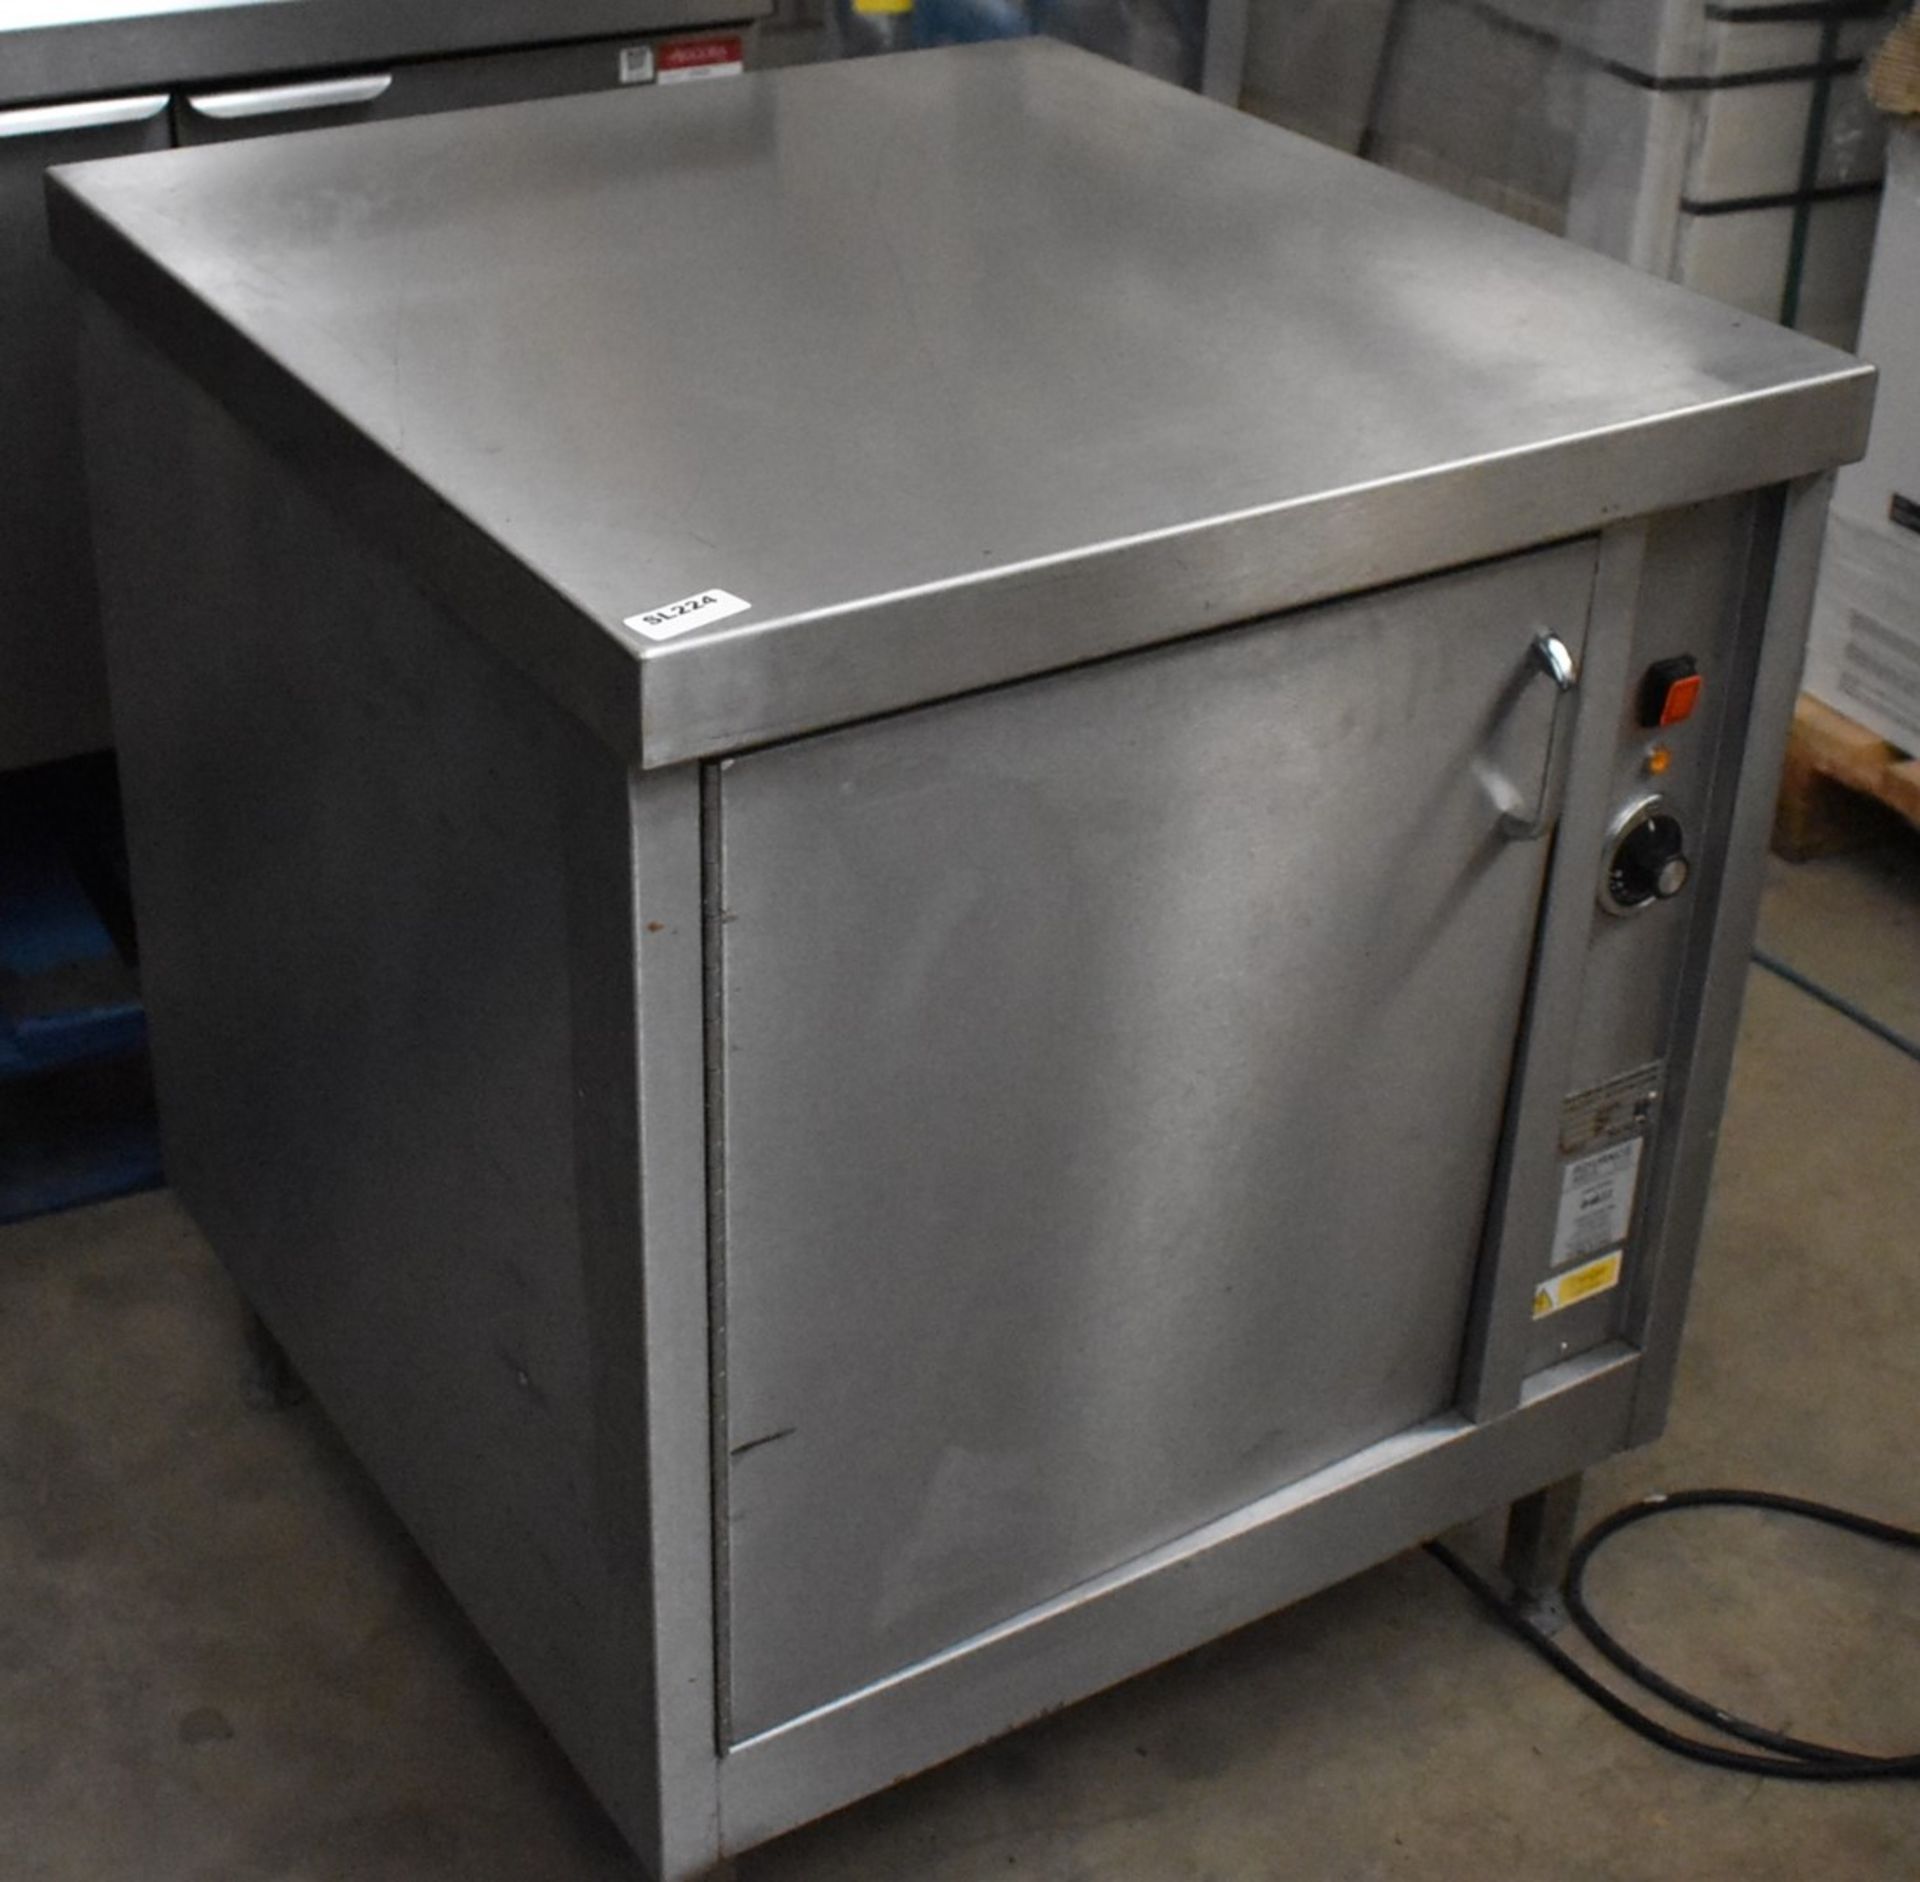 1 x Stainless Steel Warming / Holding Cabinet By Bridge Catering - 240v - With Prep Counter Top - - Image 3 of 8